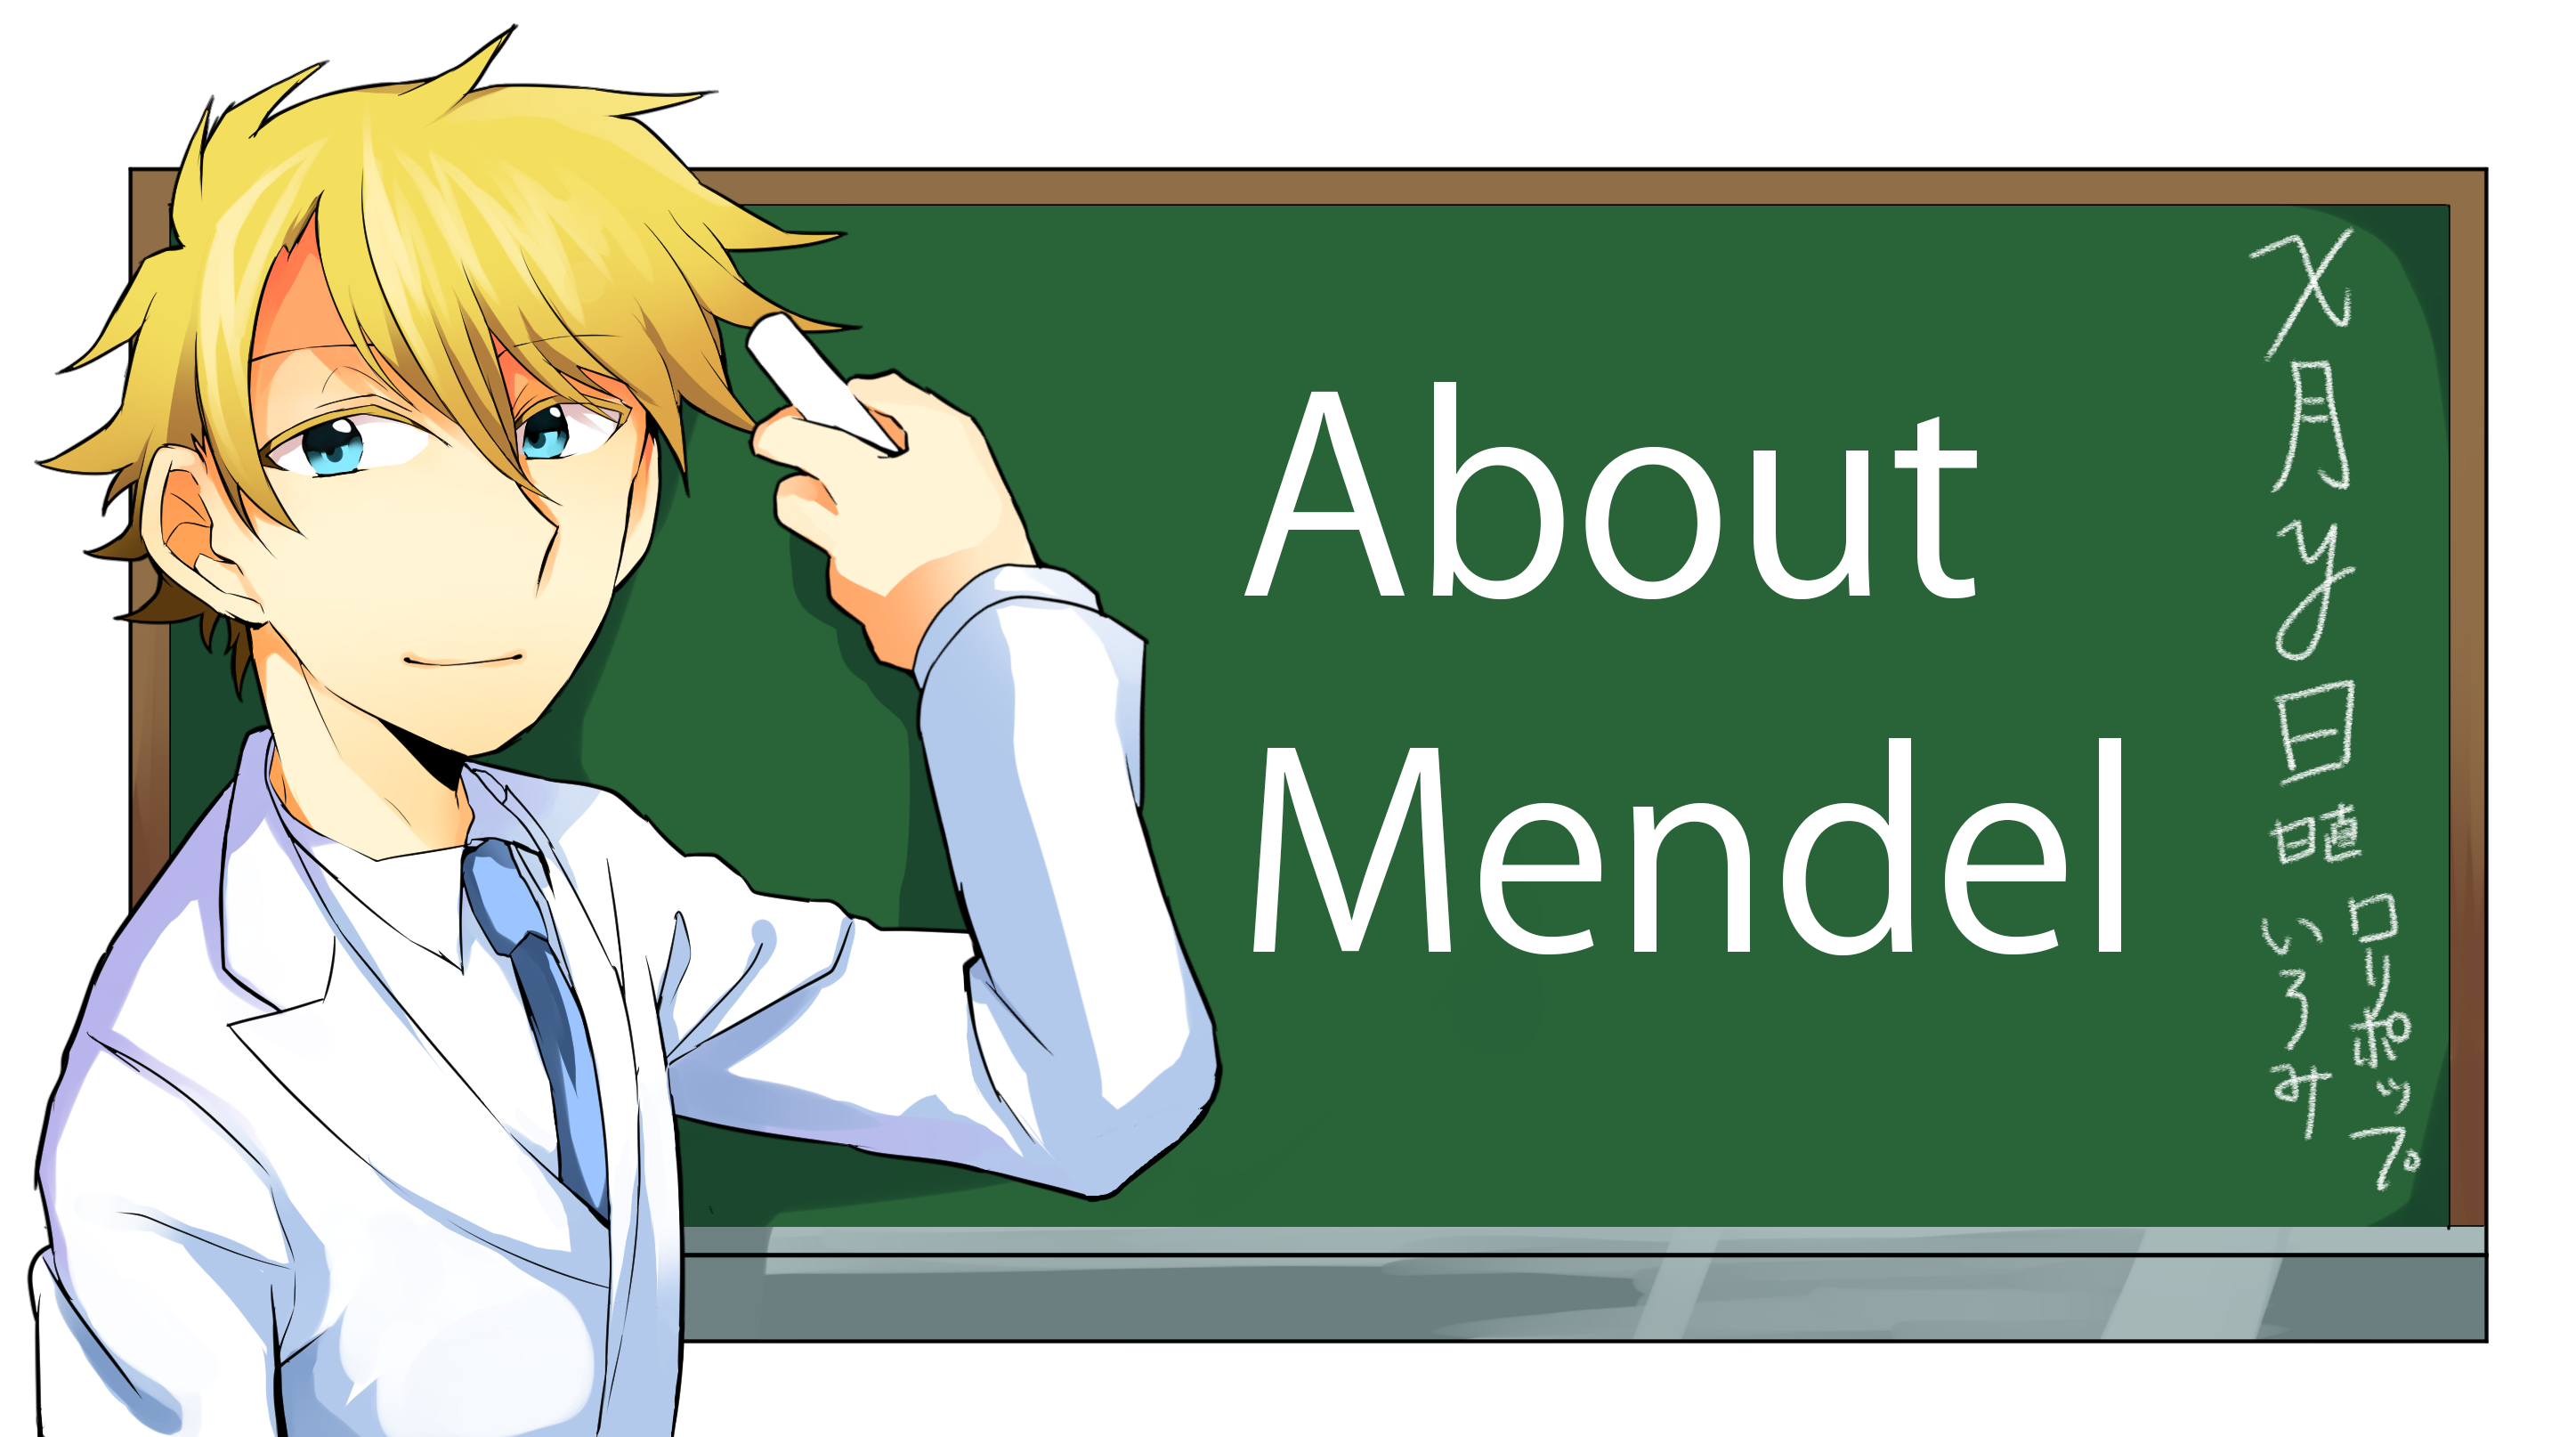 About Mendel